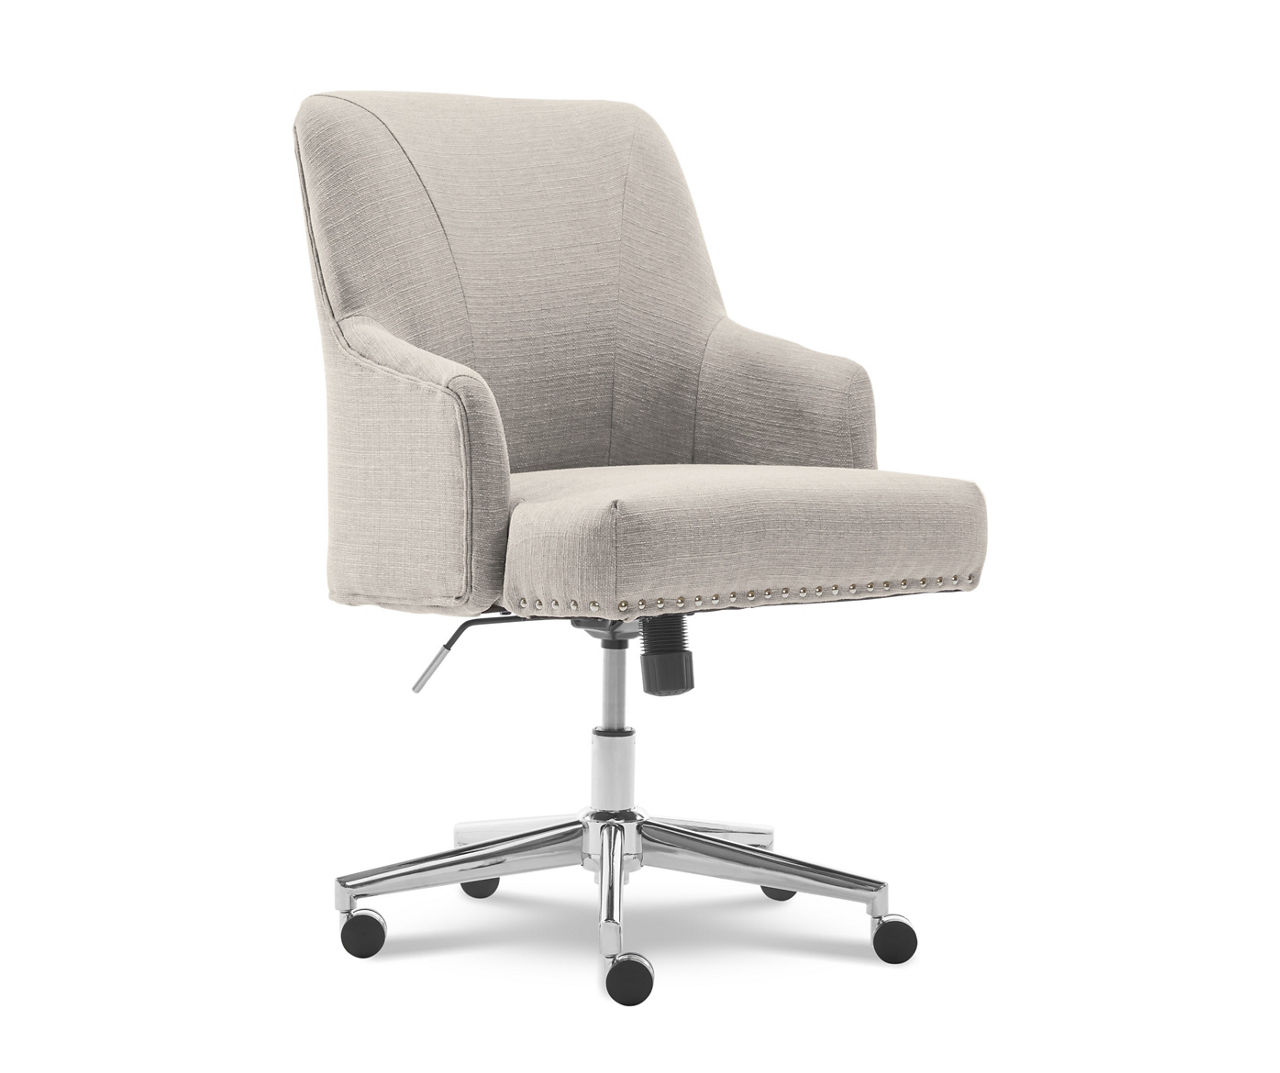 Serta at Home 48371 Leighton Home Office Chair, Light Gray